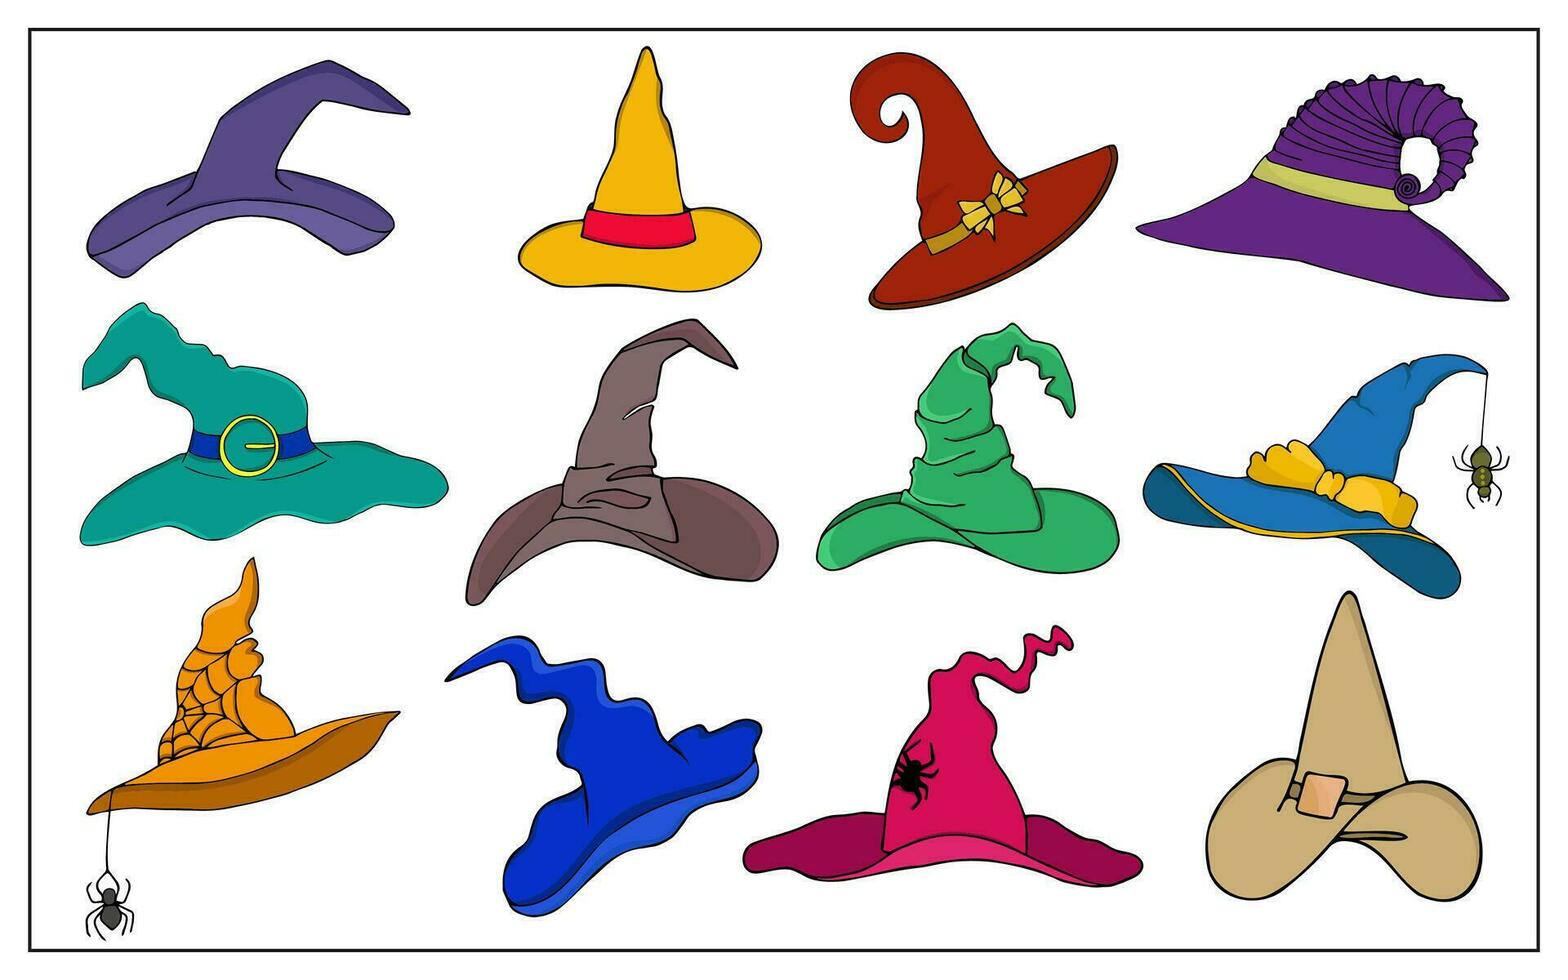 Cartoon witch, magician and wizard hats or caps. Halloween colorful hats. Fantasy character costume elements with spider webs, buckles and bows vector